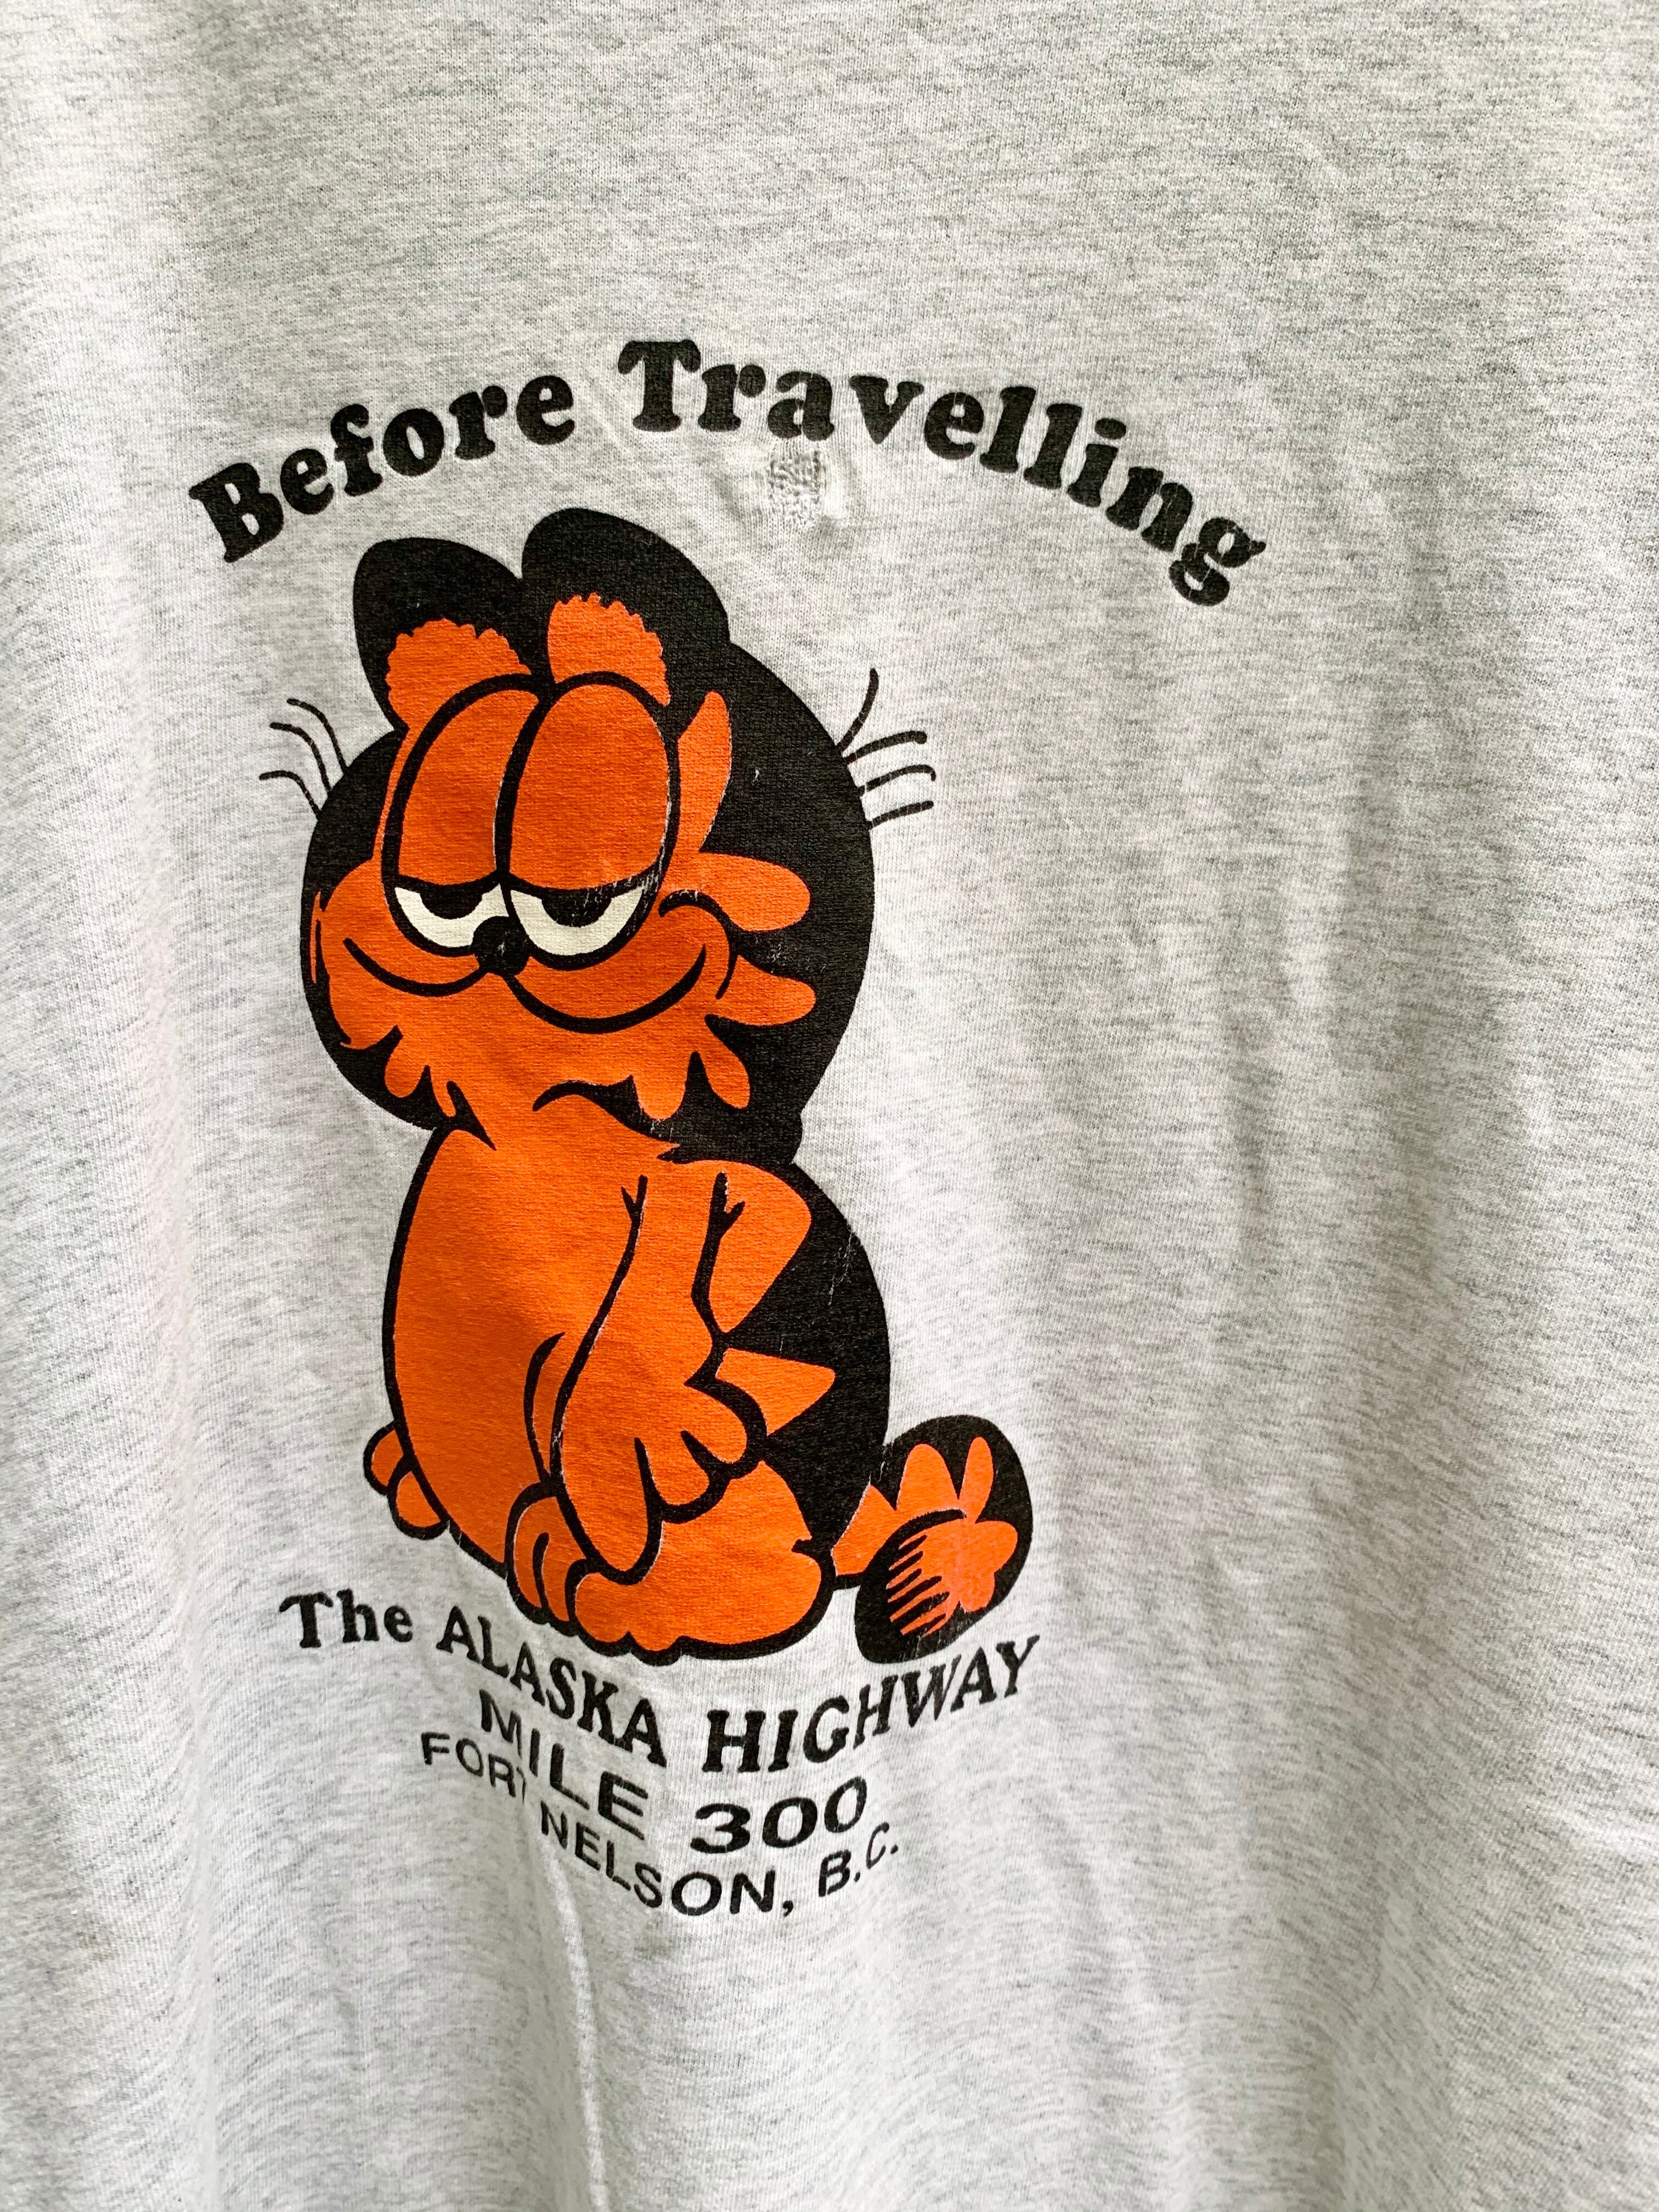 Vintage Garfield T Shirt Made In Canada | CORNER powered by BASE